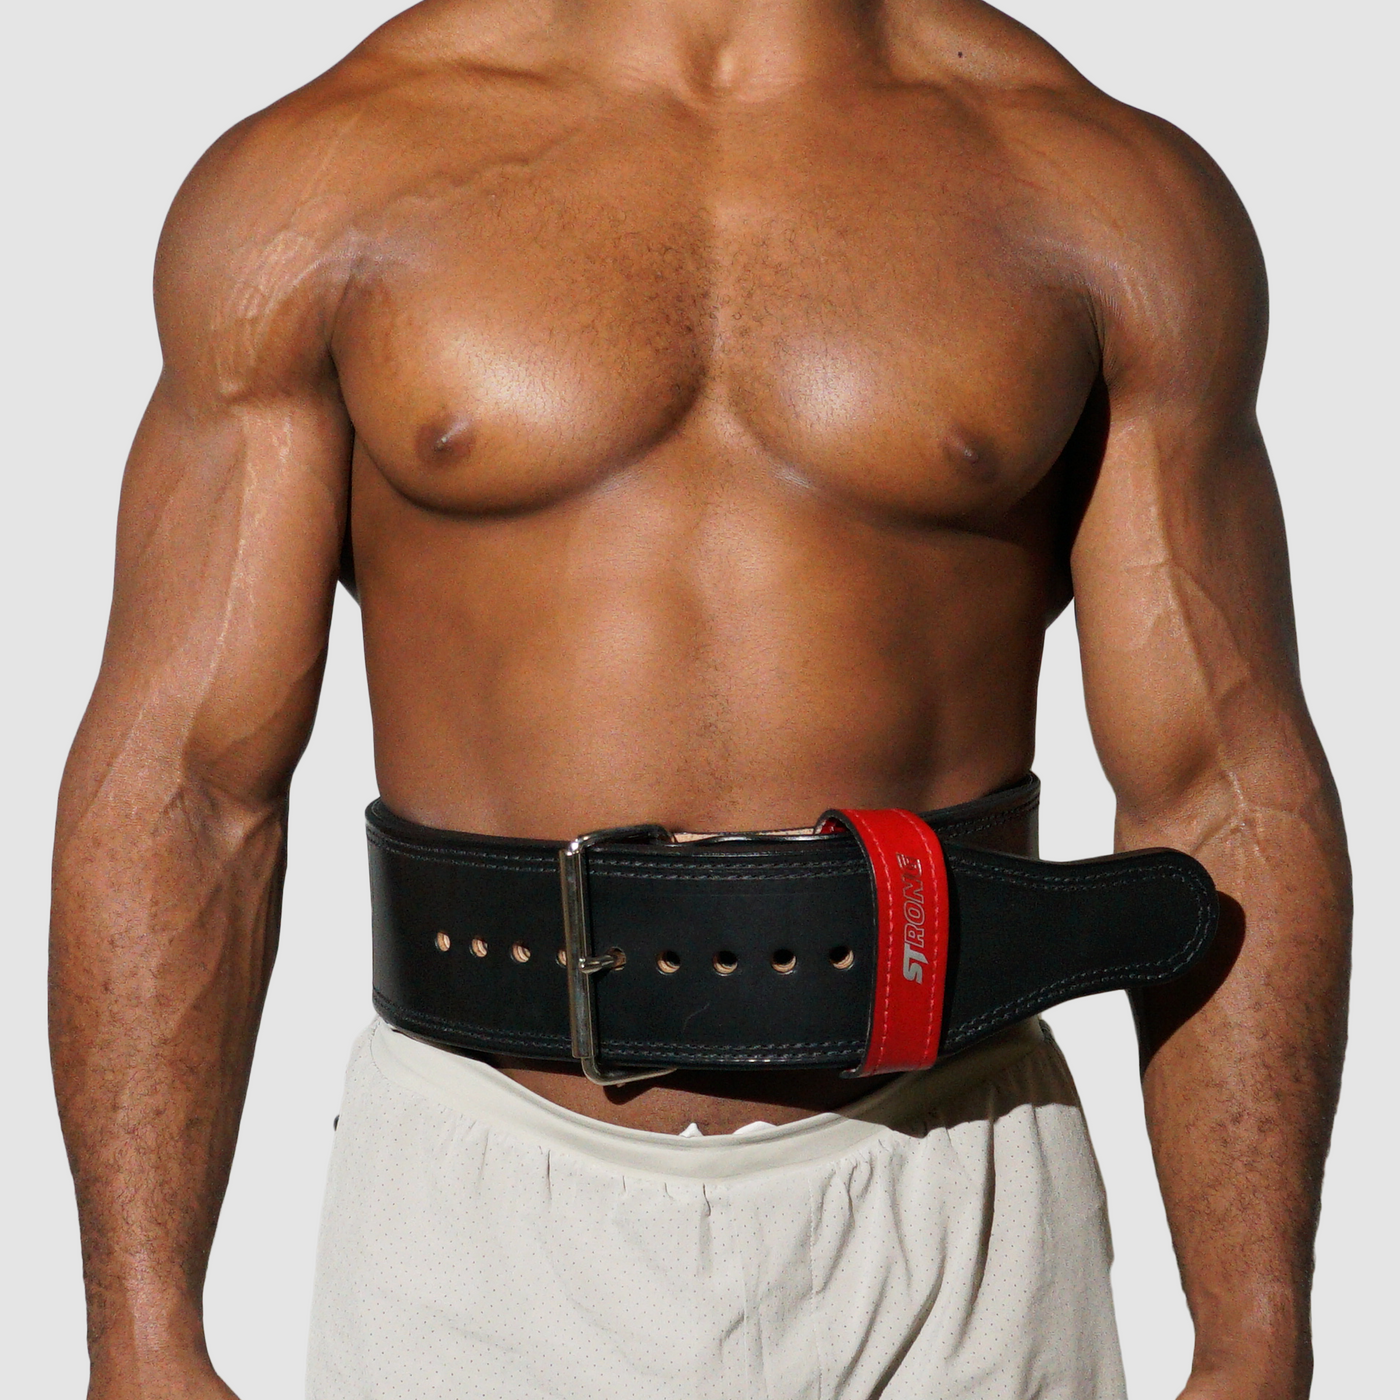 Weightlifting Belt for Fitness, Weightlifting Belt, Cowhide, Gym